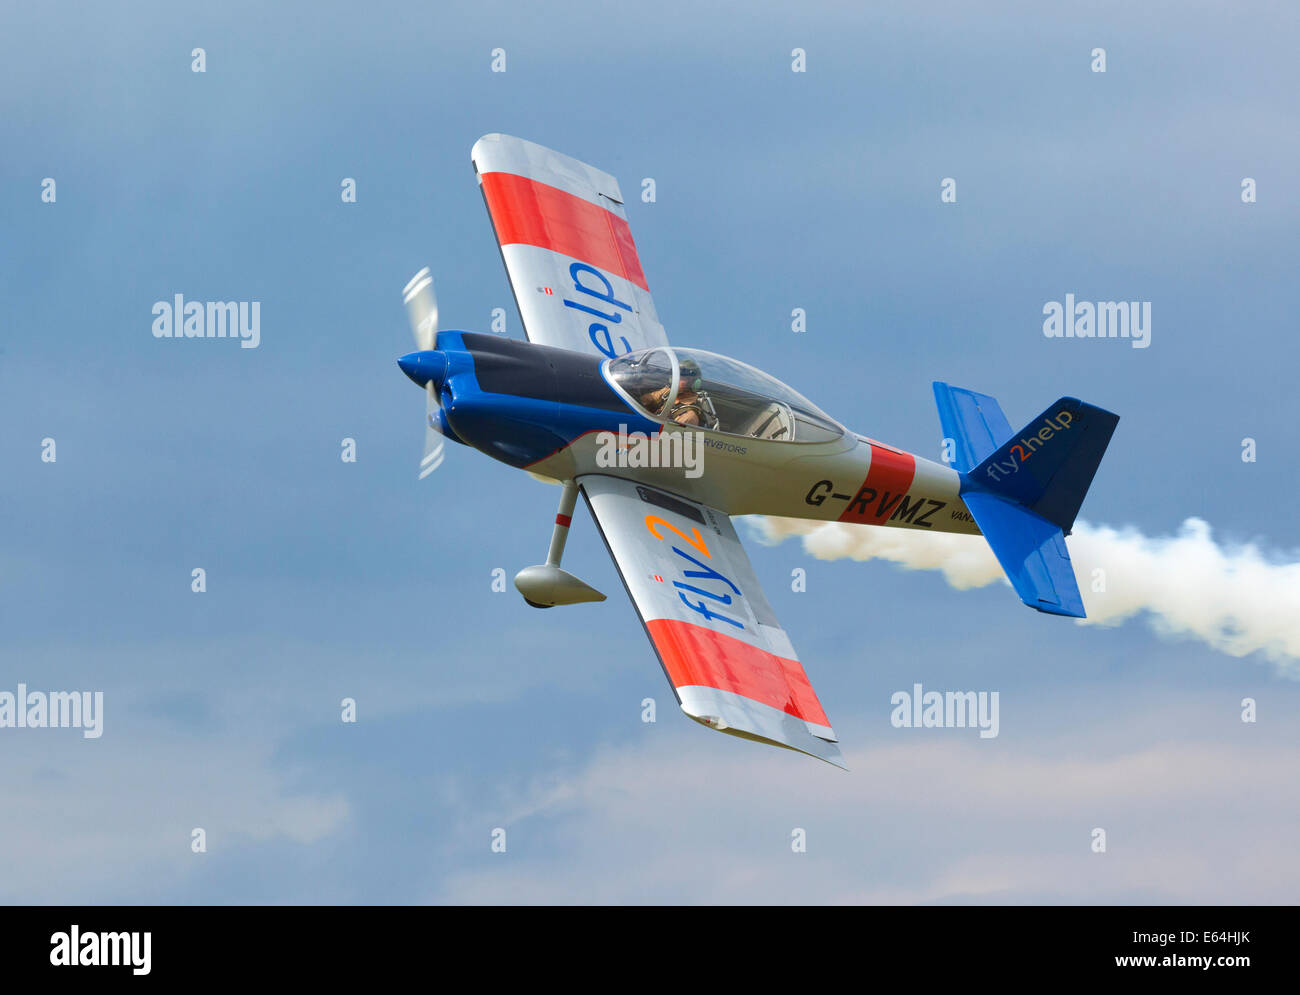 VANS RV-8 aircraft in aerobatic display in the UK Stock Photo